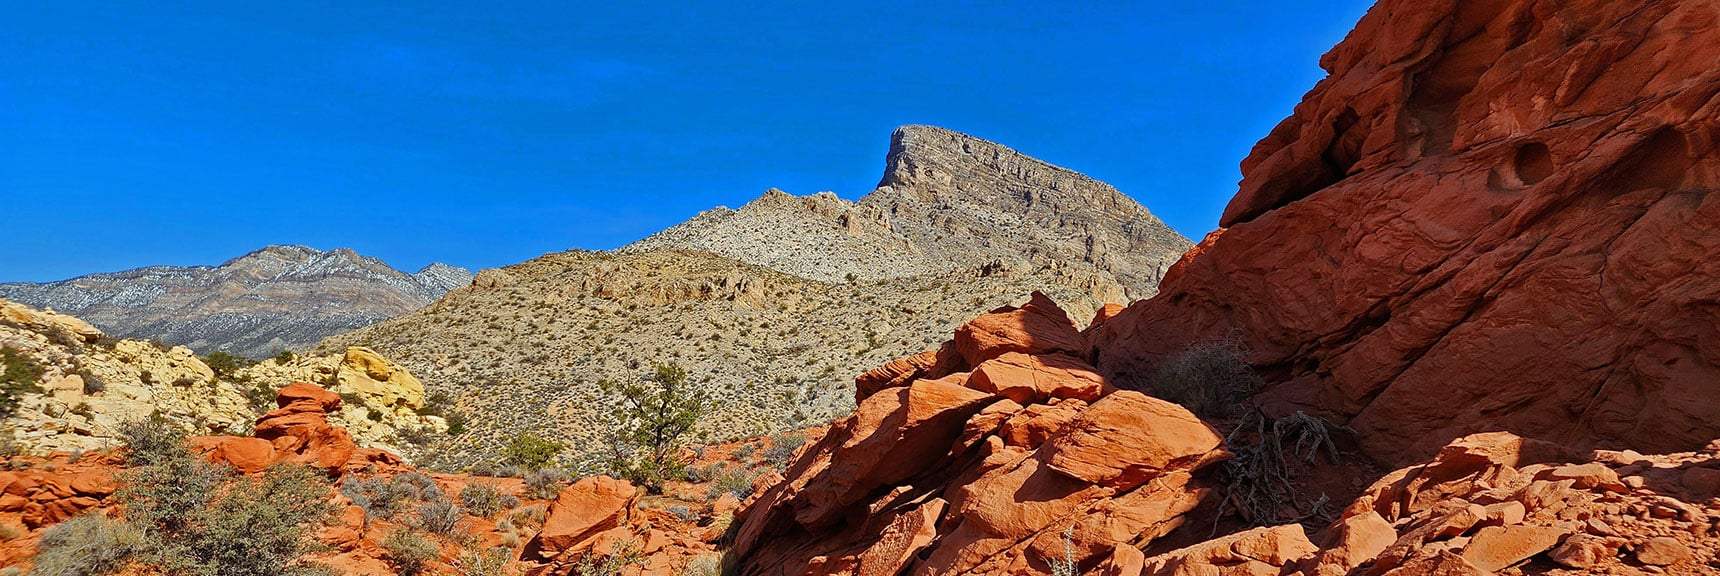 Turtlehead Peak Appears Ahead. We're Now in Red Rock Canyon | Ash Canyon to Calico Tanks | Calico Basin and Red Rock Canyon, Nevada | David Smith | Las Vegas Area Trails